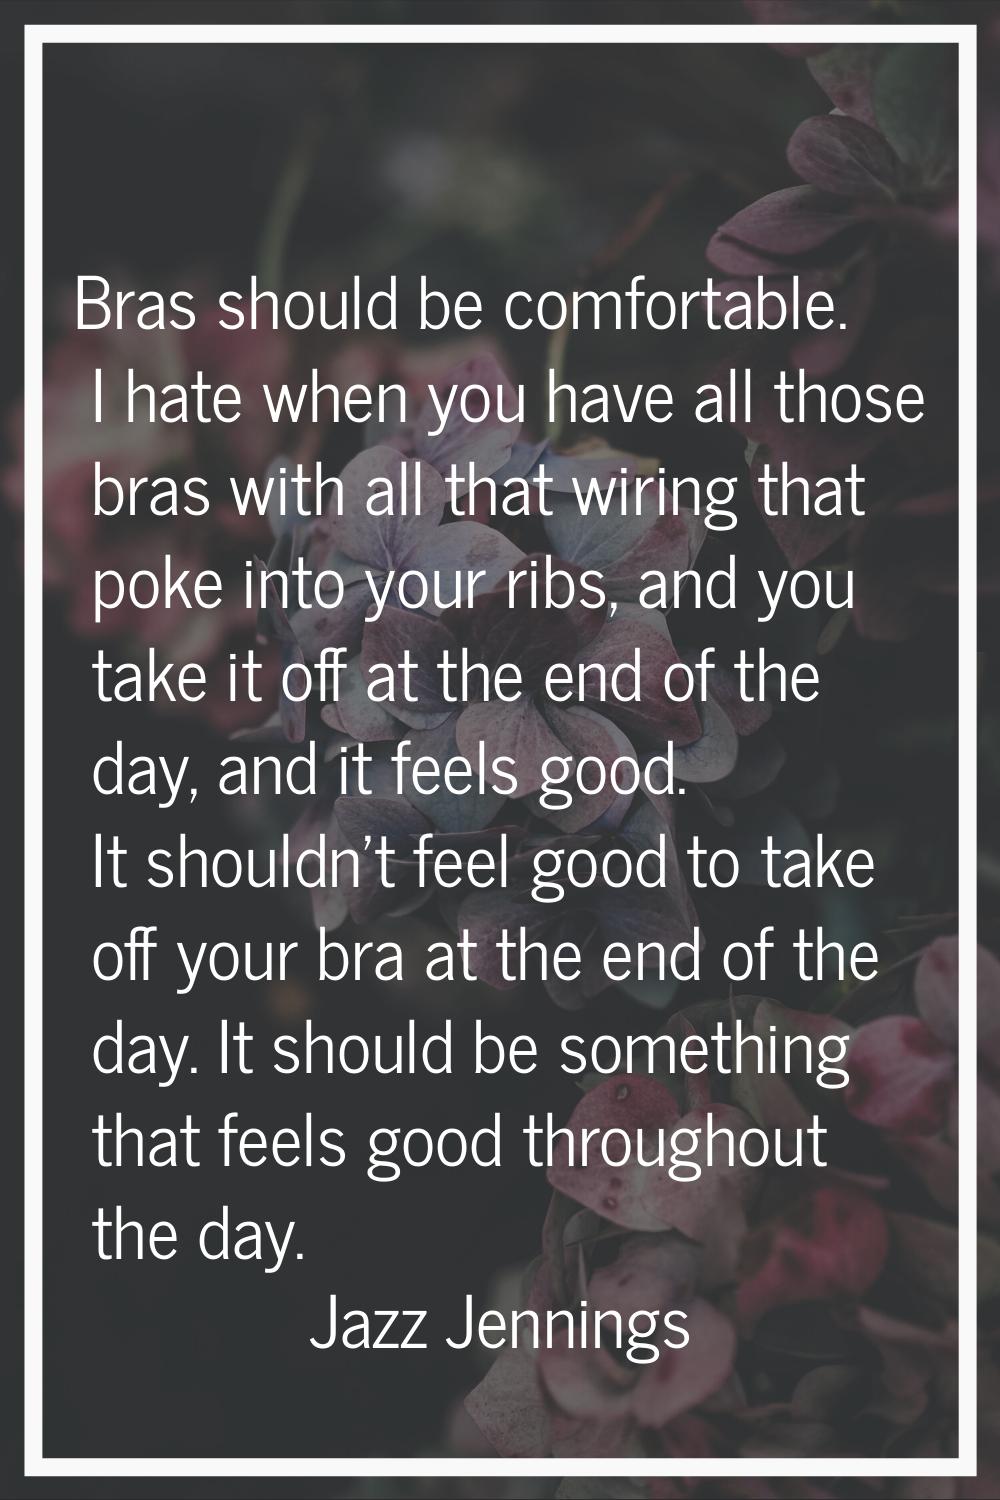 Bras should be comfortable. I hate when you have all those bras with all that wiring that poke into